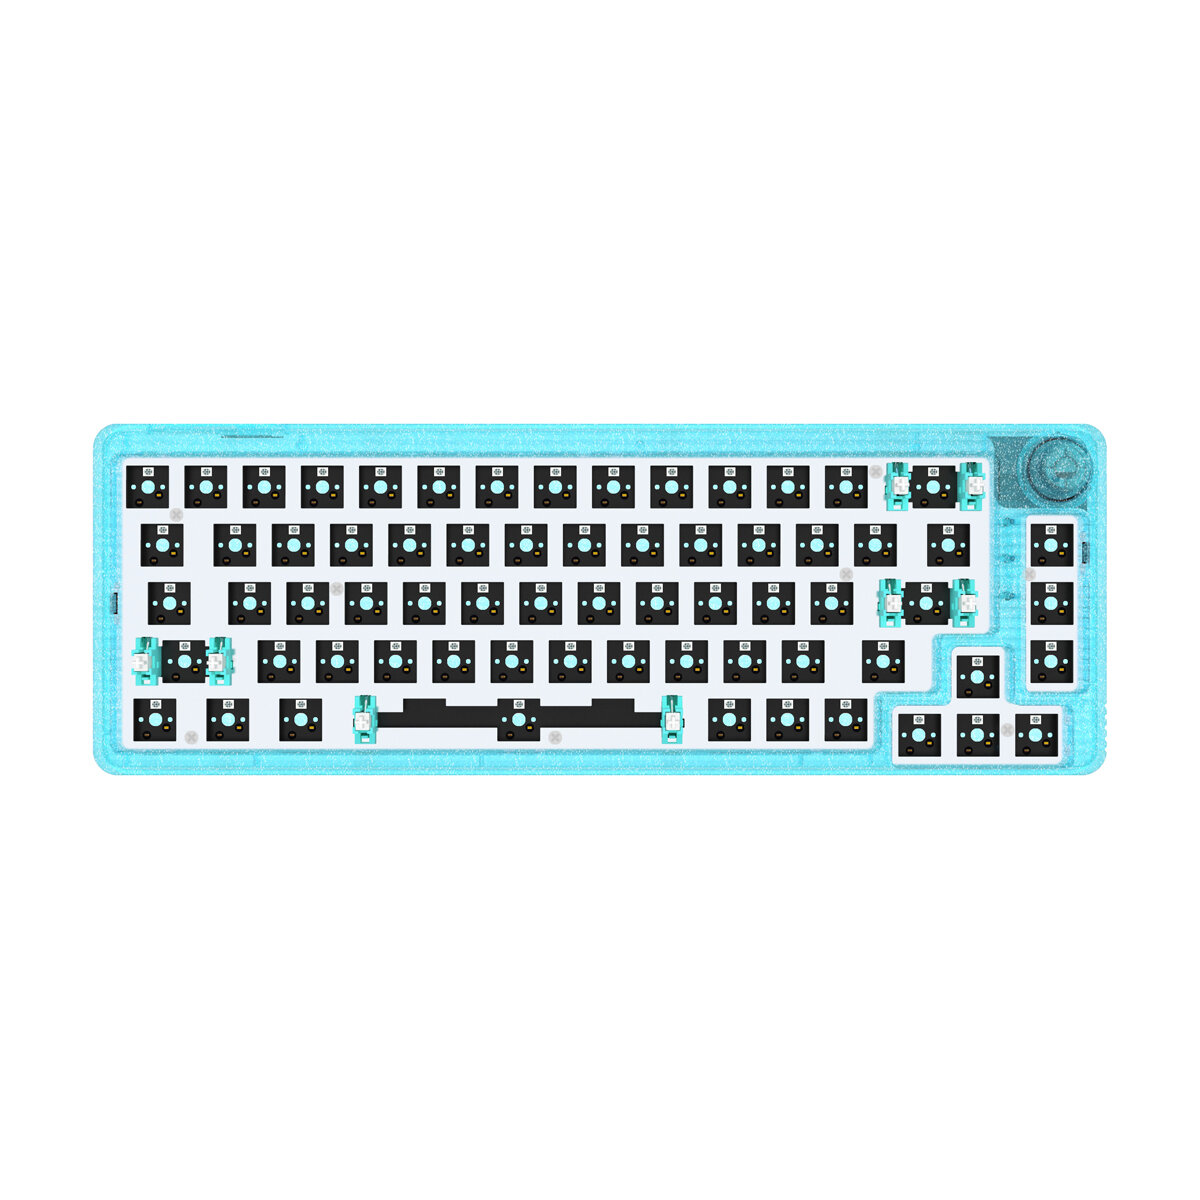 Image of GamaKay LK67 Keyboard Customized Kit 67 Keys RGB Hot Swappable bluetooth Translucent 65% Programmable Triple Mode Wired